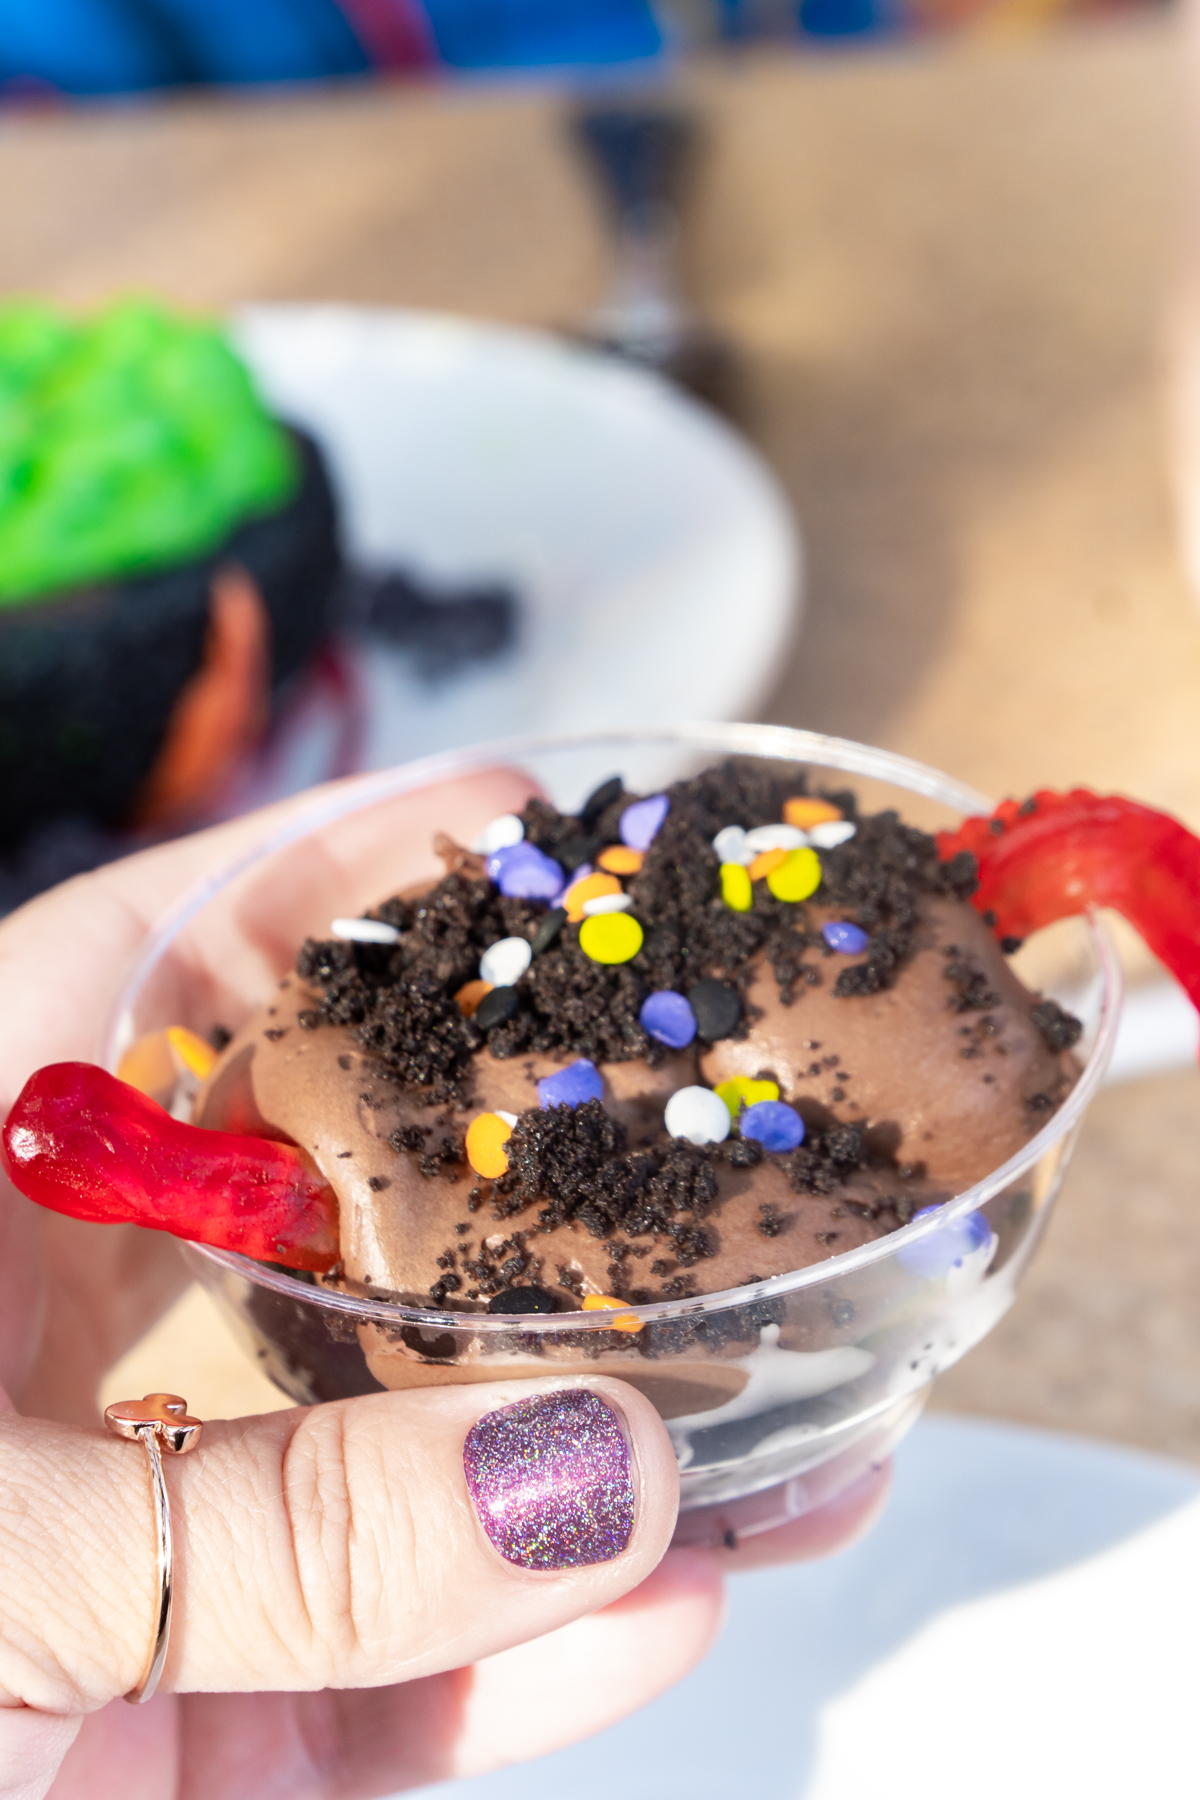 dirt and worms cup in someone's hand